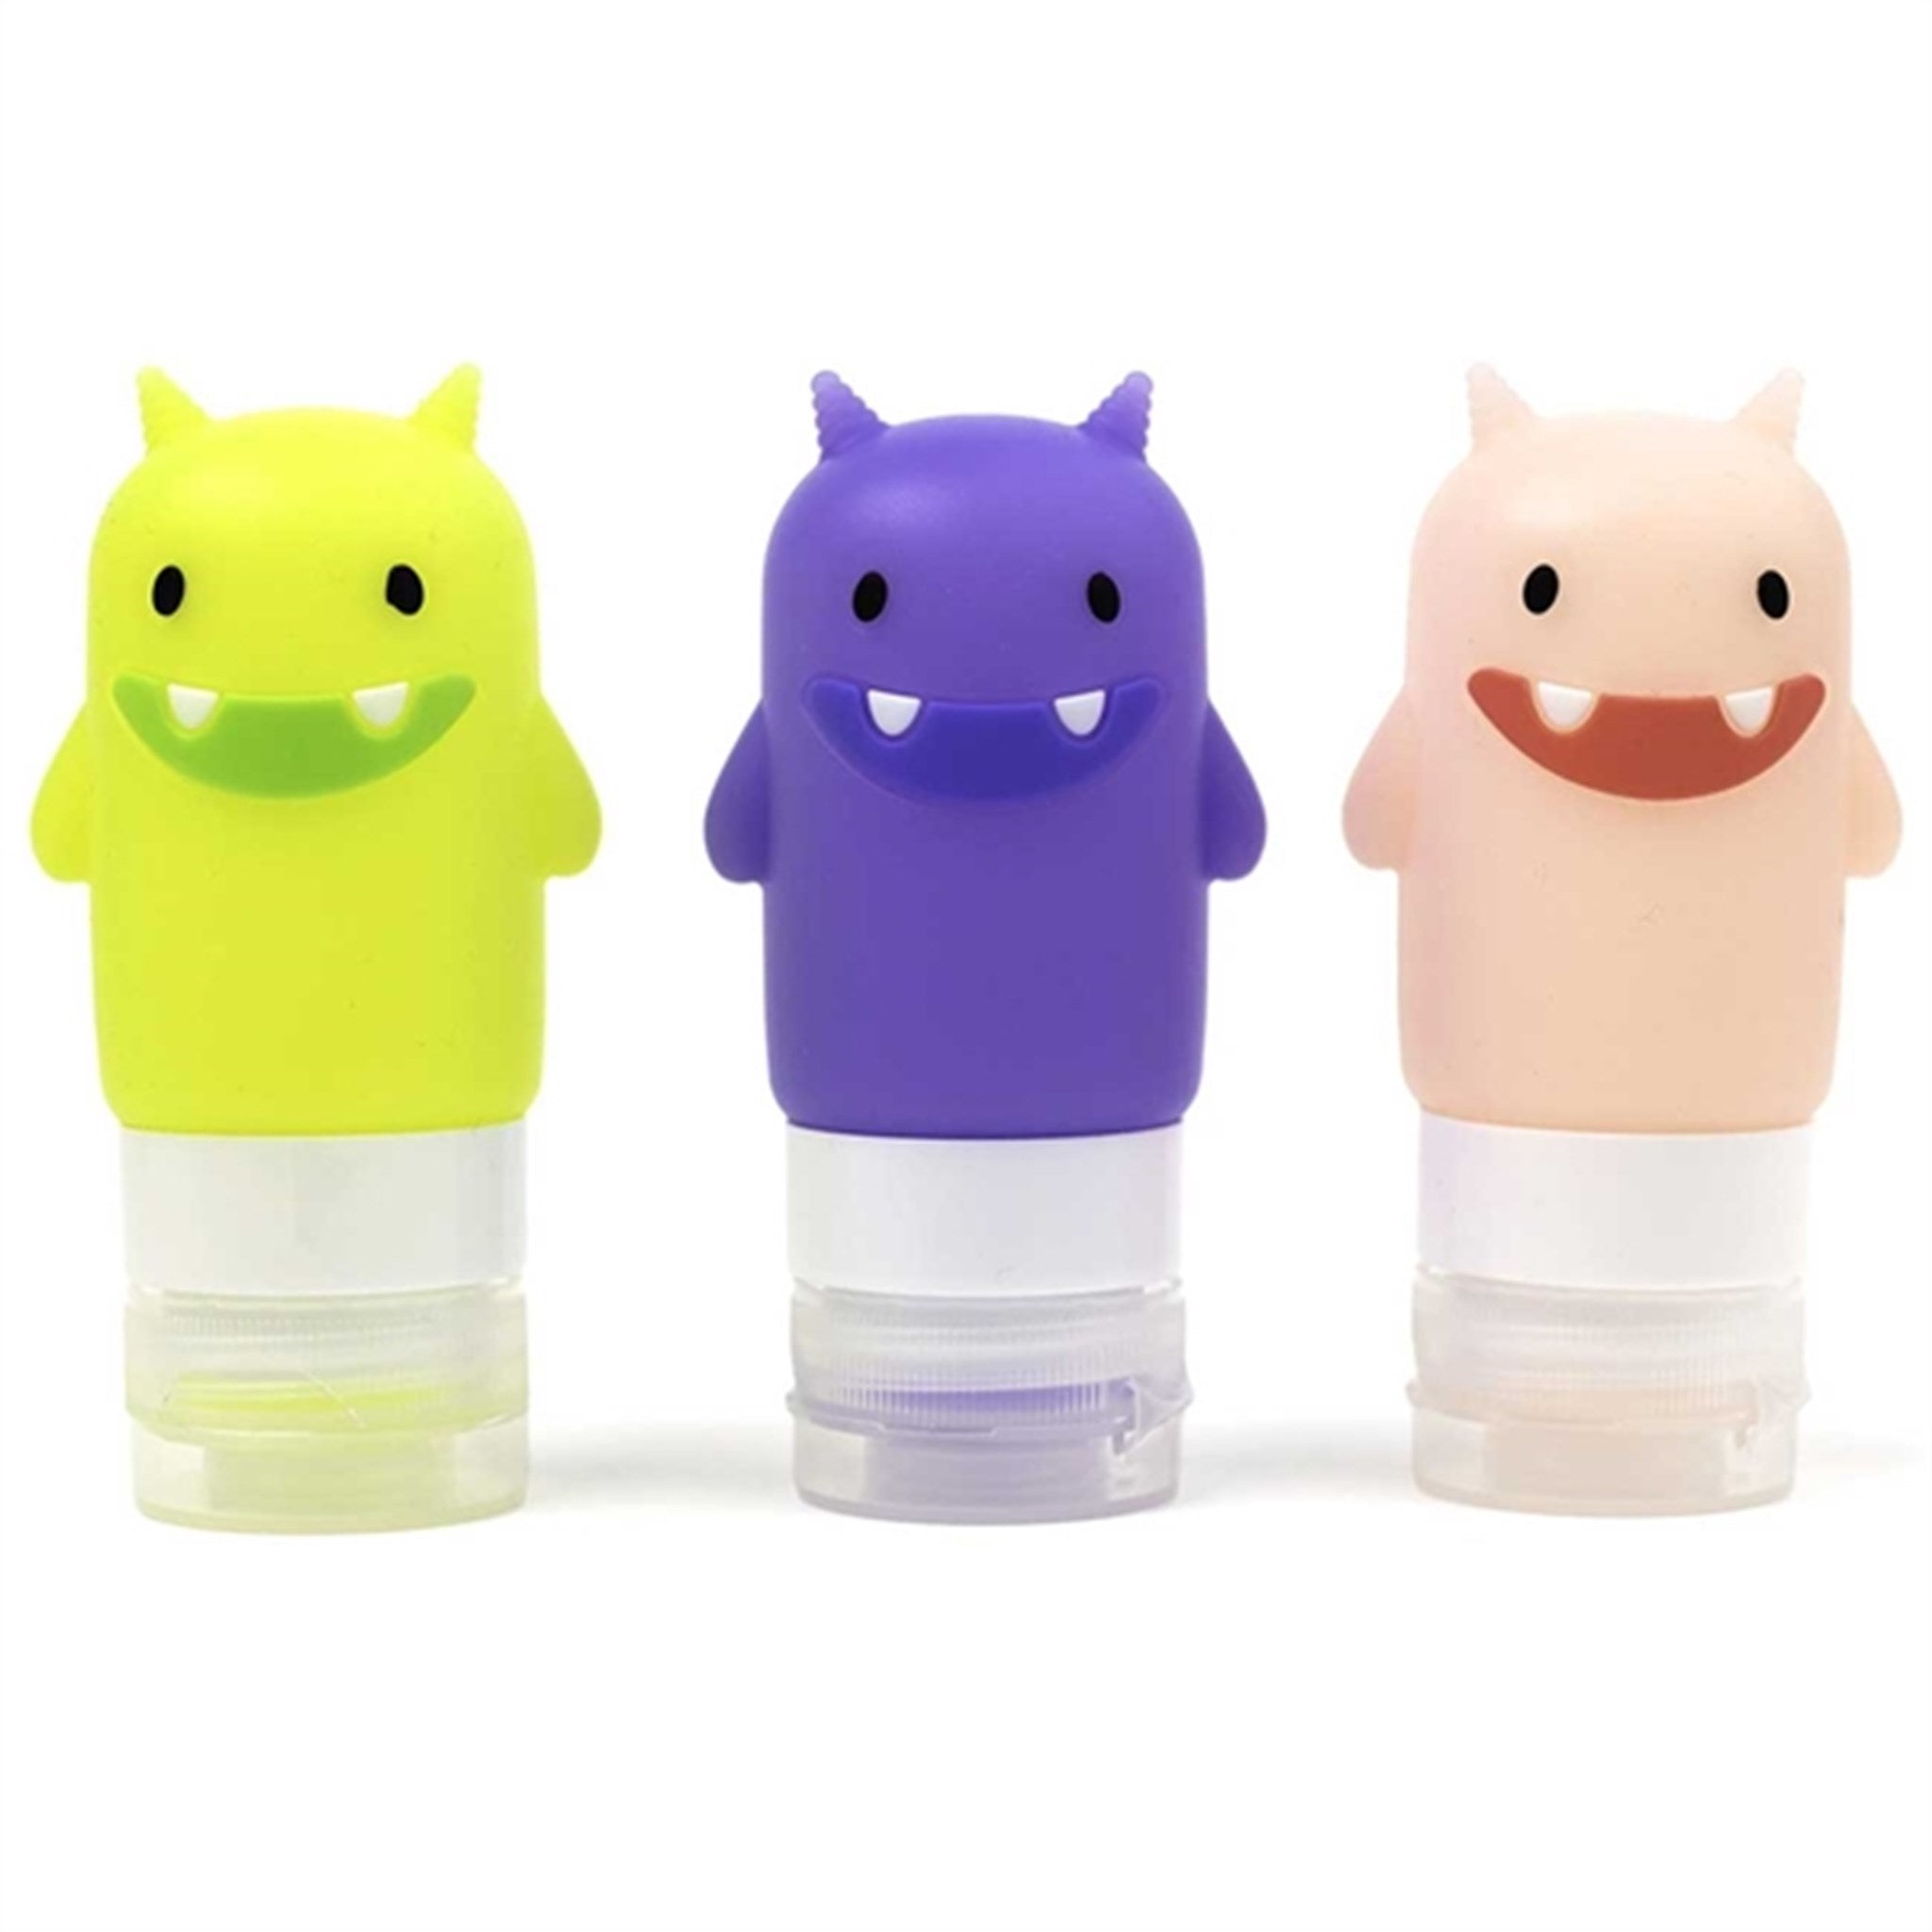 Yumbox Funny Monsters Silicone Condiment Squeeze Bottles